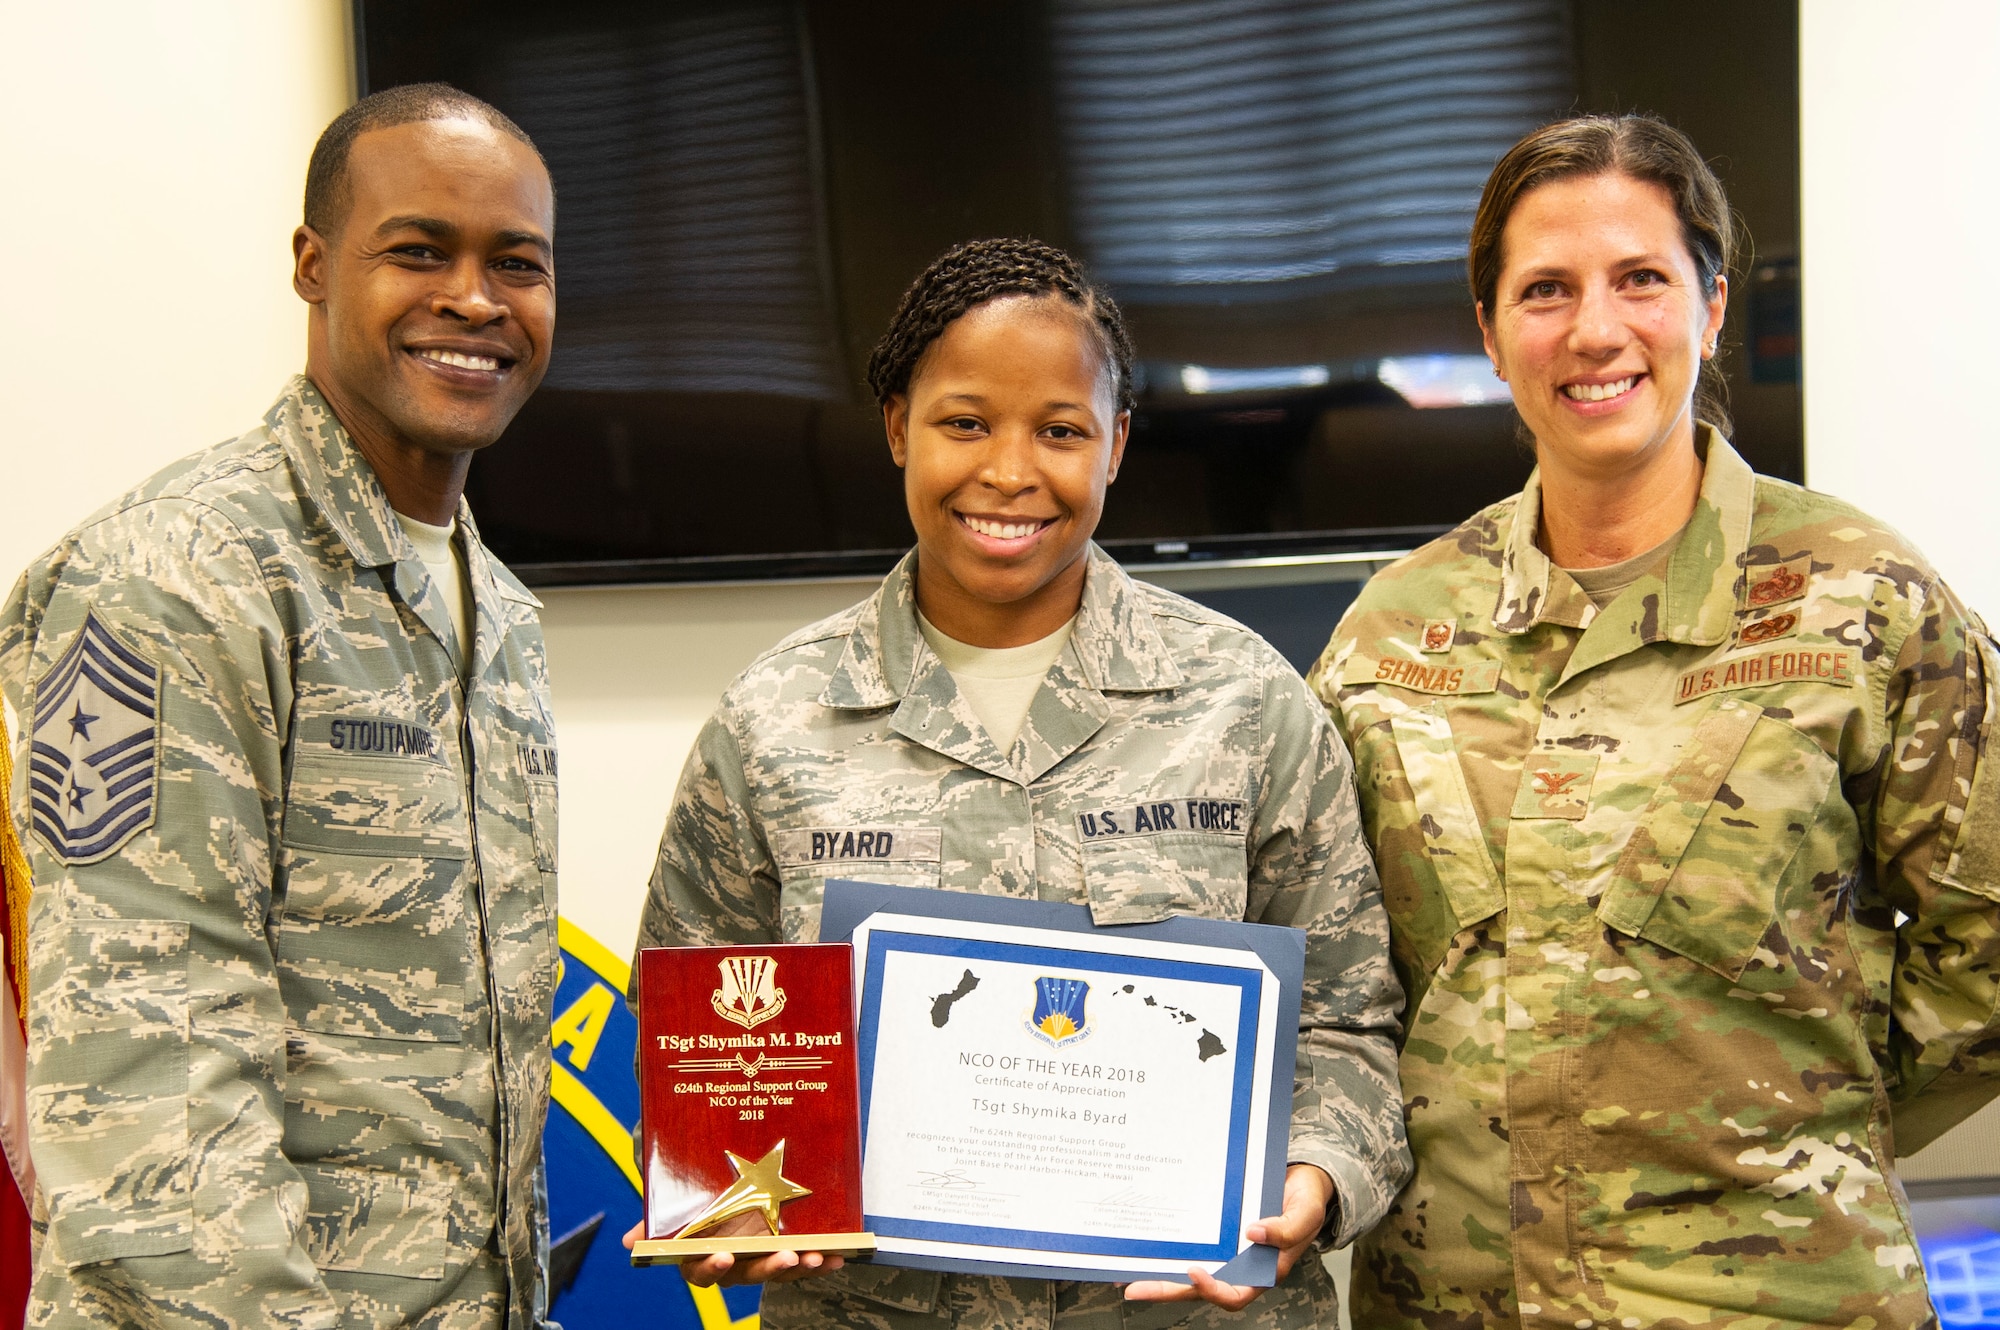 ech. Sgt. Shymika Byard, a Reserve Citizen Airmen from the 624th Regional Support Group, receives the Group’s 2018 Noncommissioned Officer of the Year award from Col. Athanasia Shinas, 624th RSG commander, and Chief Master Sgt. Danyell Stoutamire, 624th RSG command chief, during an awards presentation March 3, 2019, at Joint Base Pearl Harbor-Hickam, Hawaii.